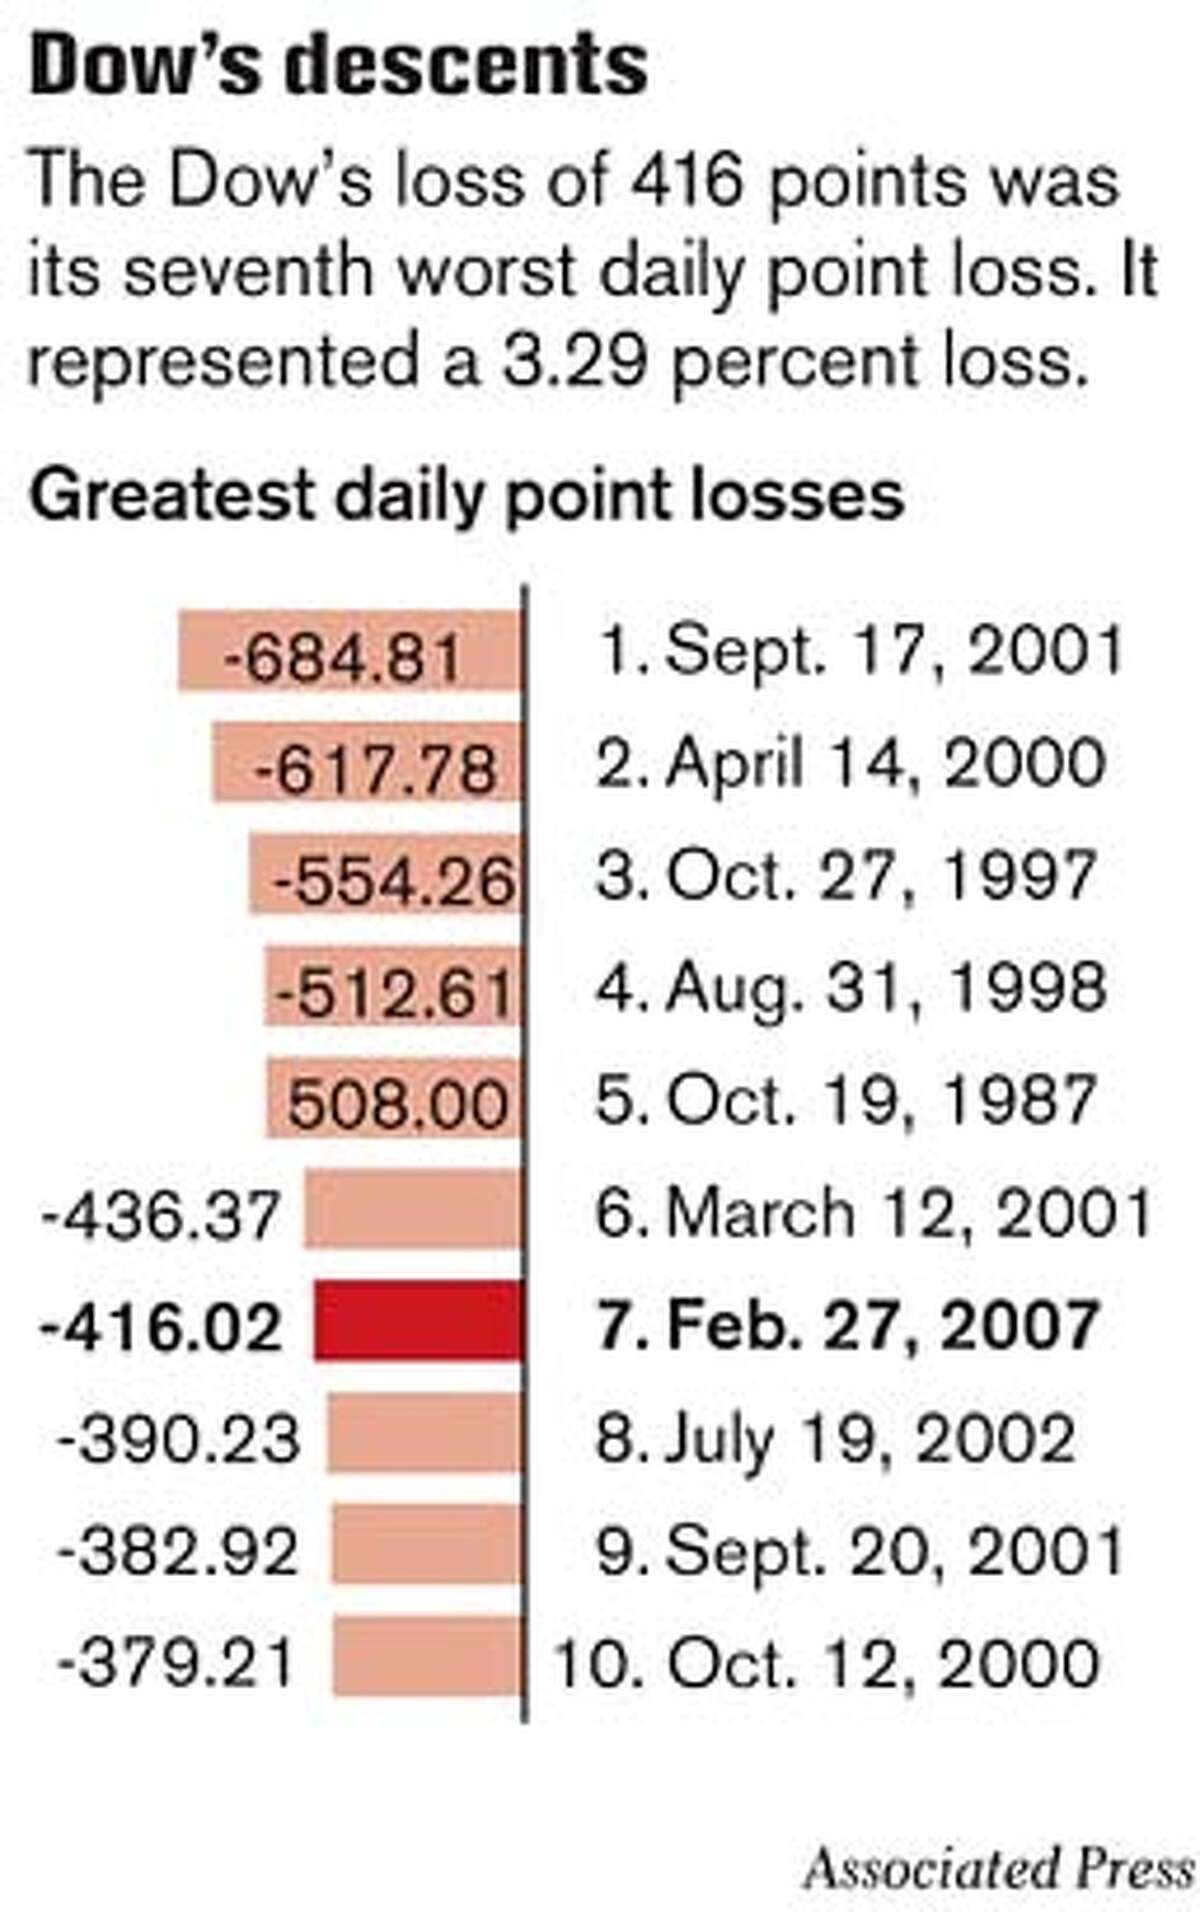 Dow's Descents. Associated Press Graphic